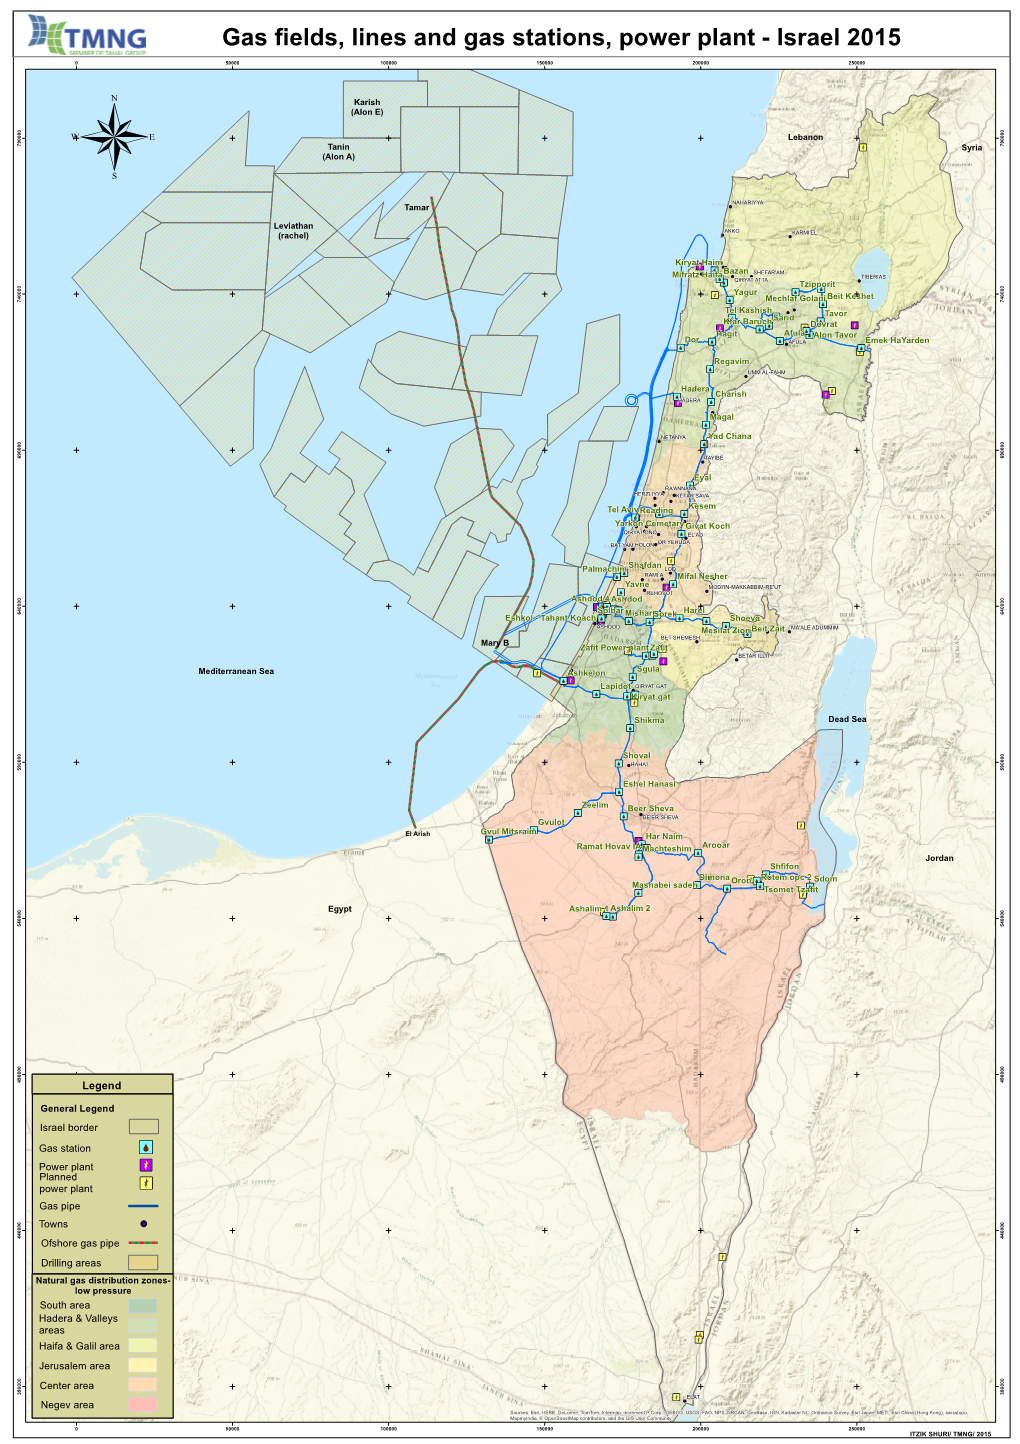 Gas Fields, Lines and Gas Stations, Power Plant - Israel 2015